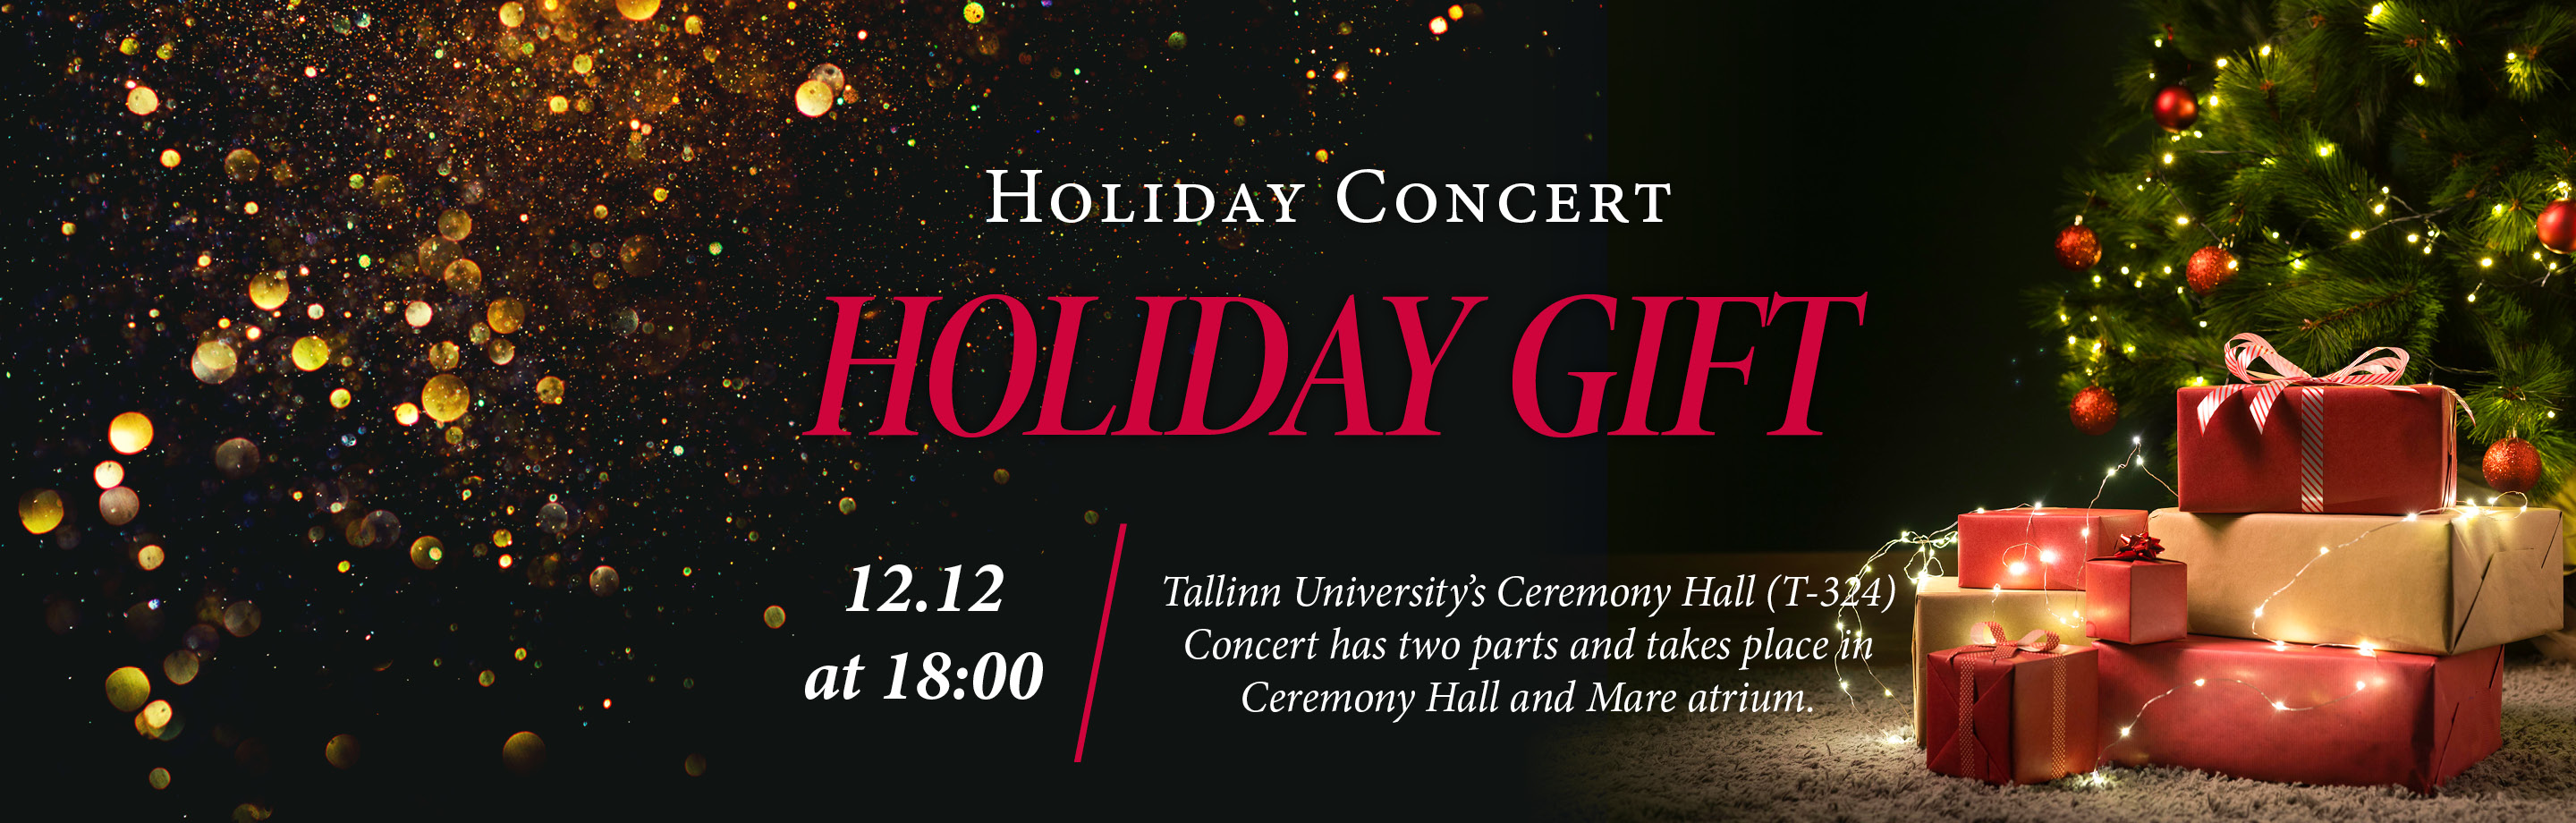 Holiday concert poster